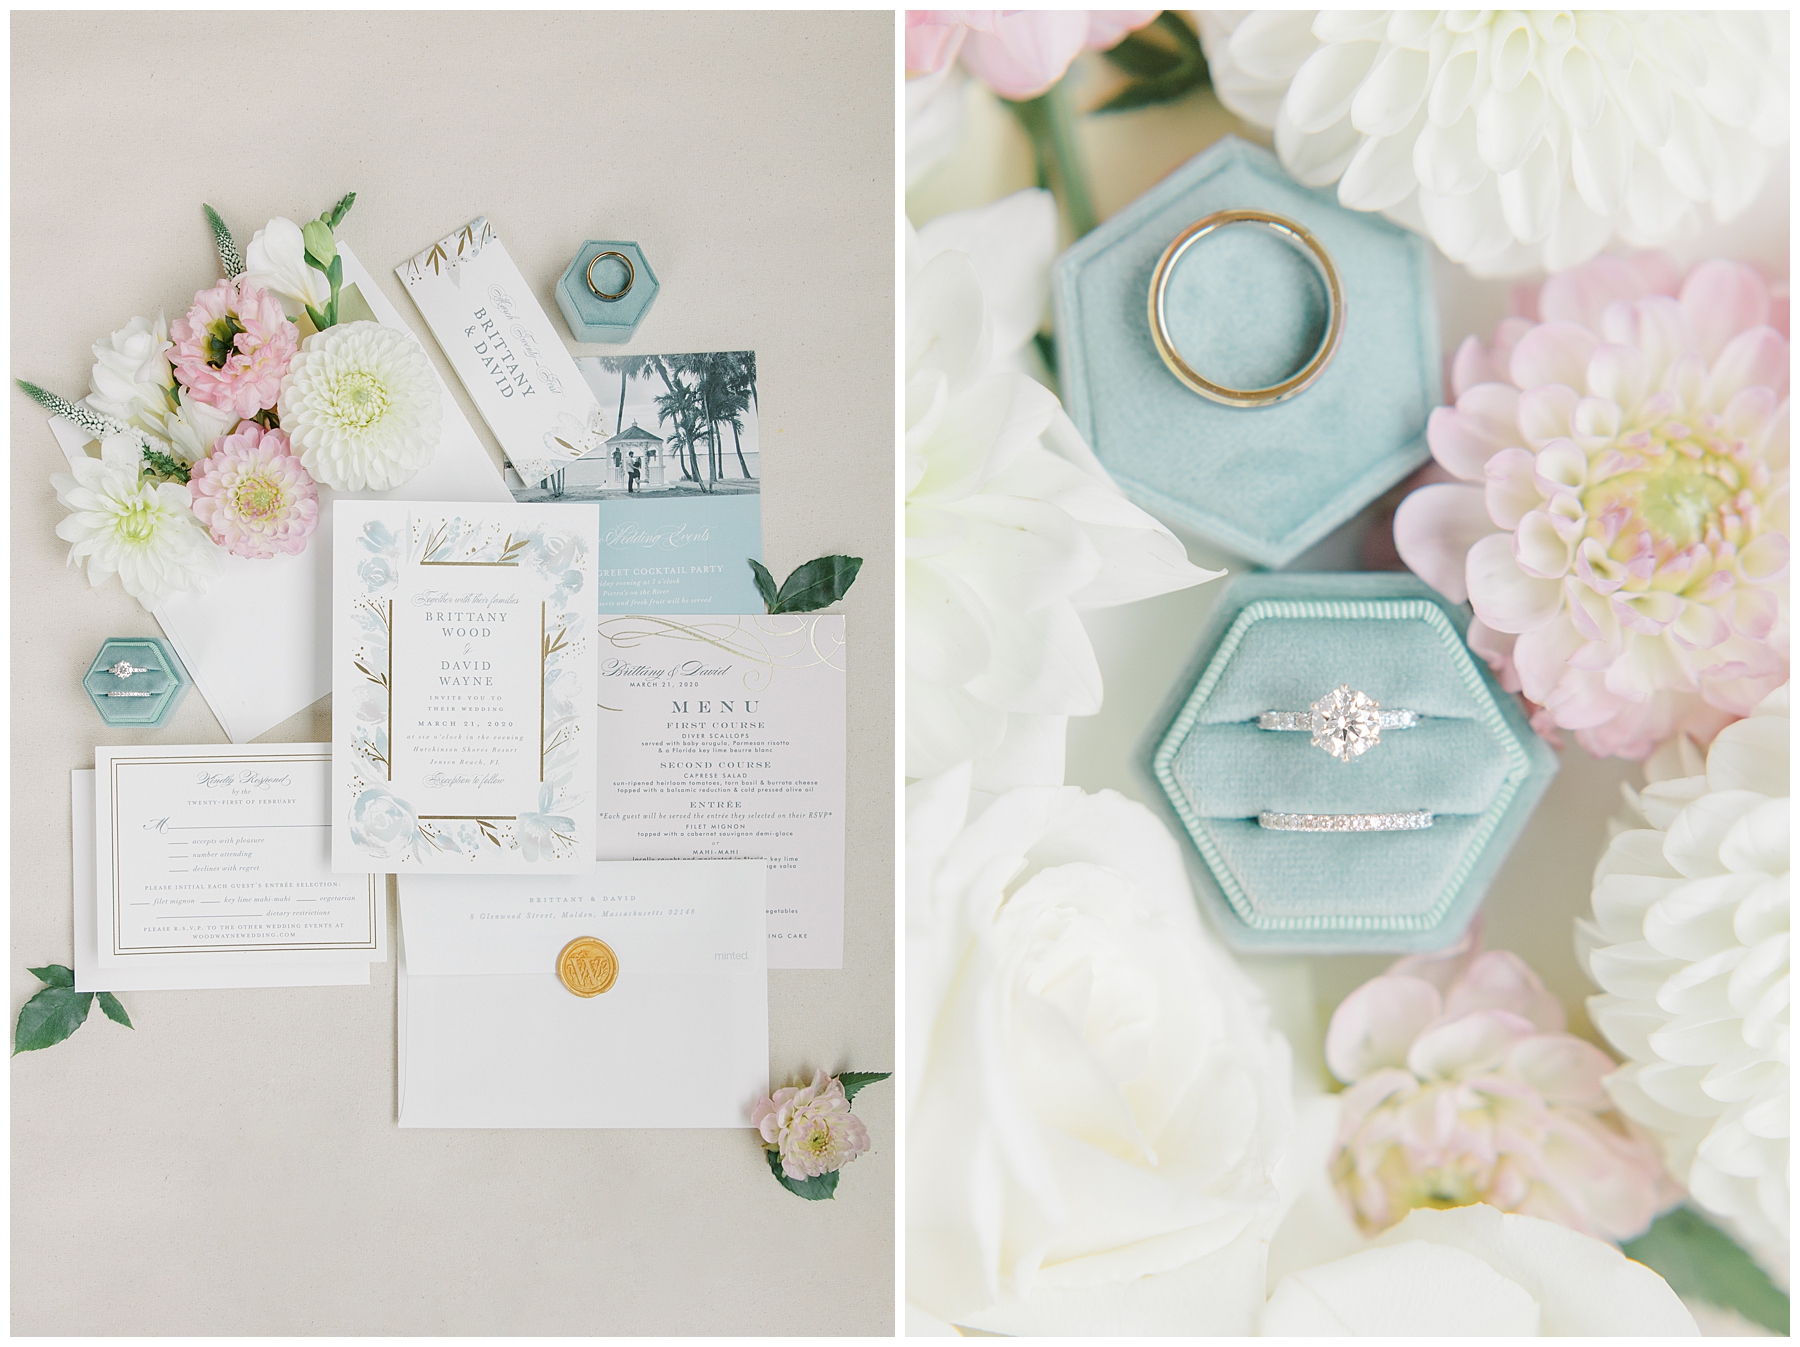 wedding flat lay and details from Boston Wedding 2.0 Photoshoot